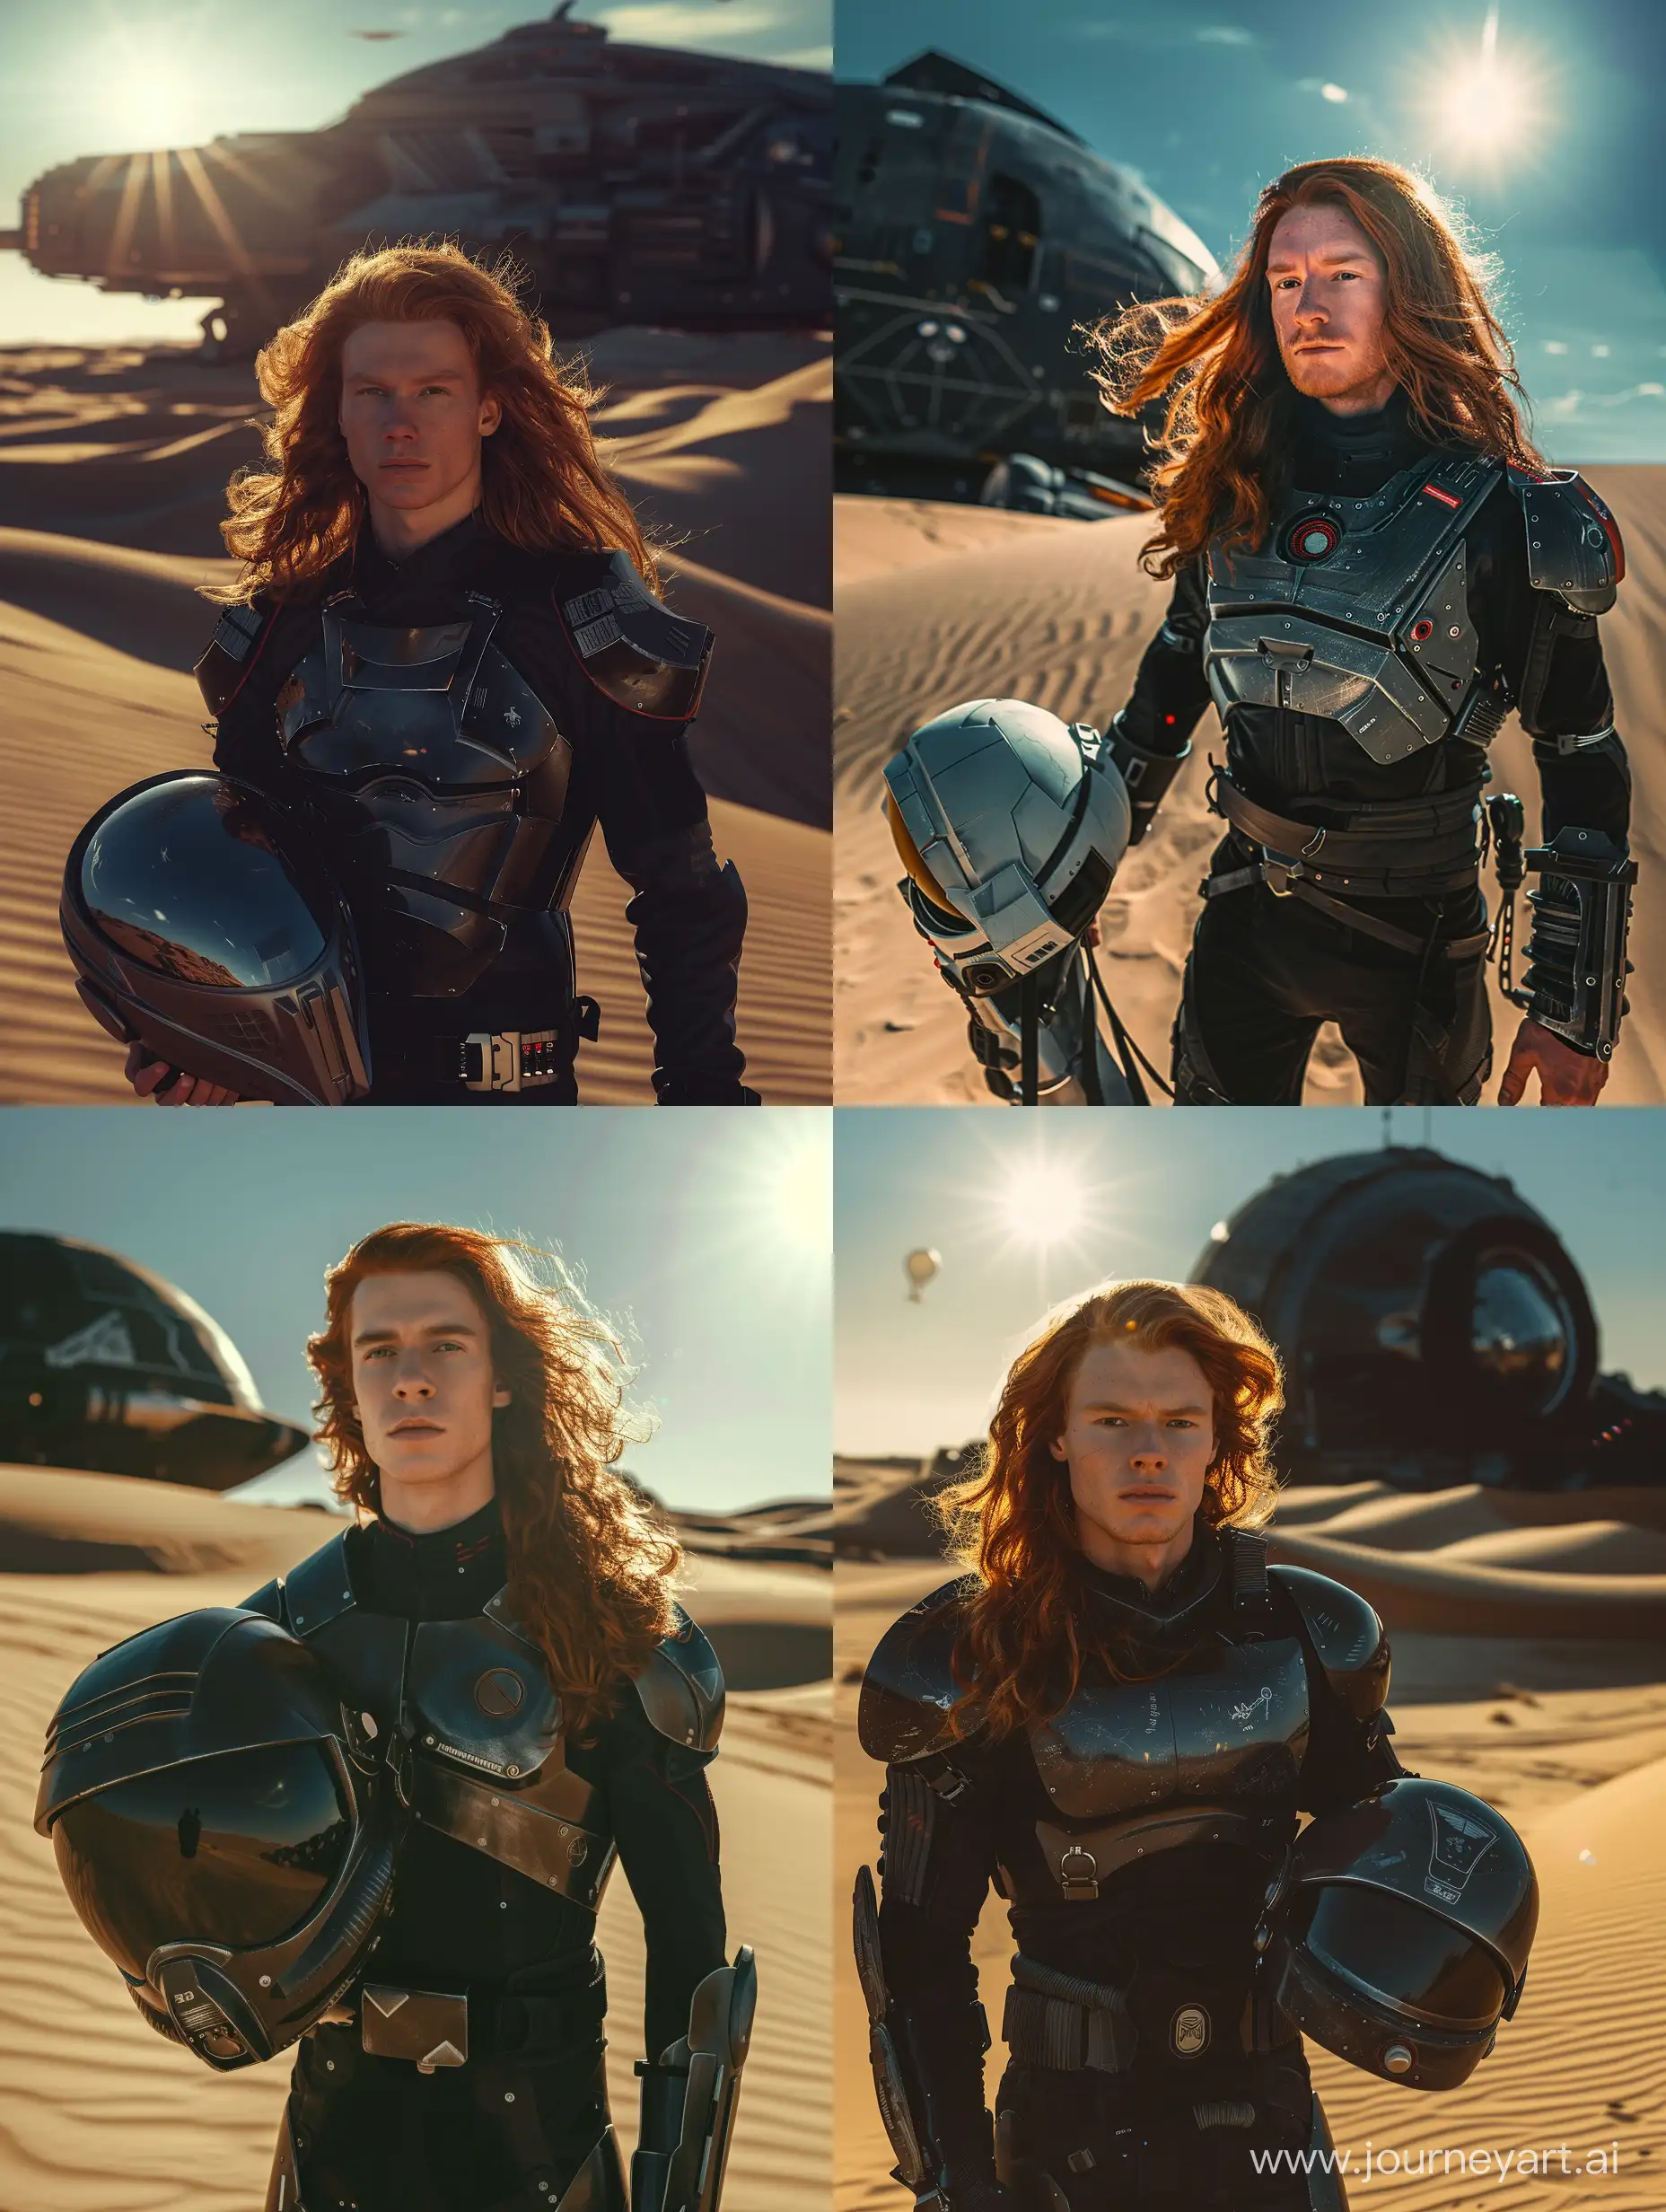 Handsome-Young-Man-in-Space-Armor-Holds-Helmet-against-Dunes-and-Spaceship-Backdrop